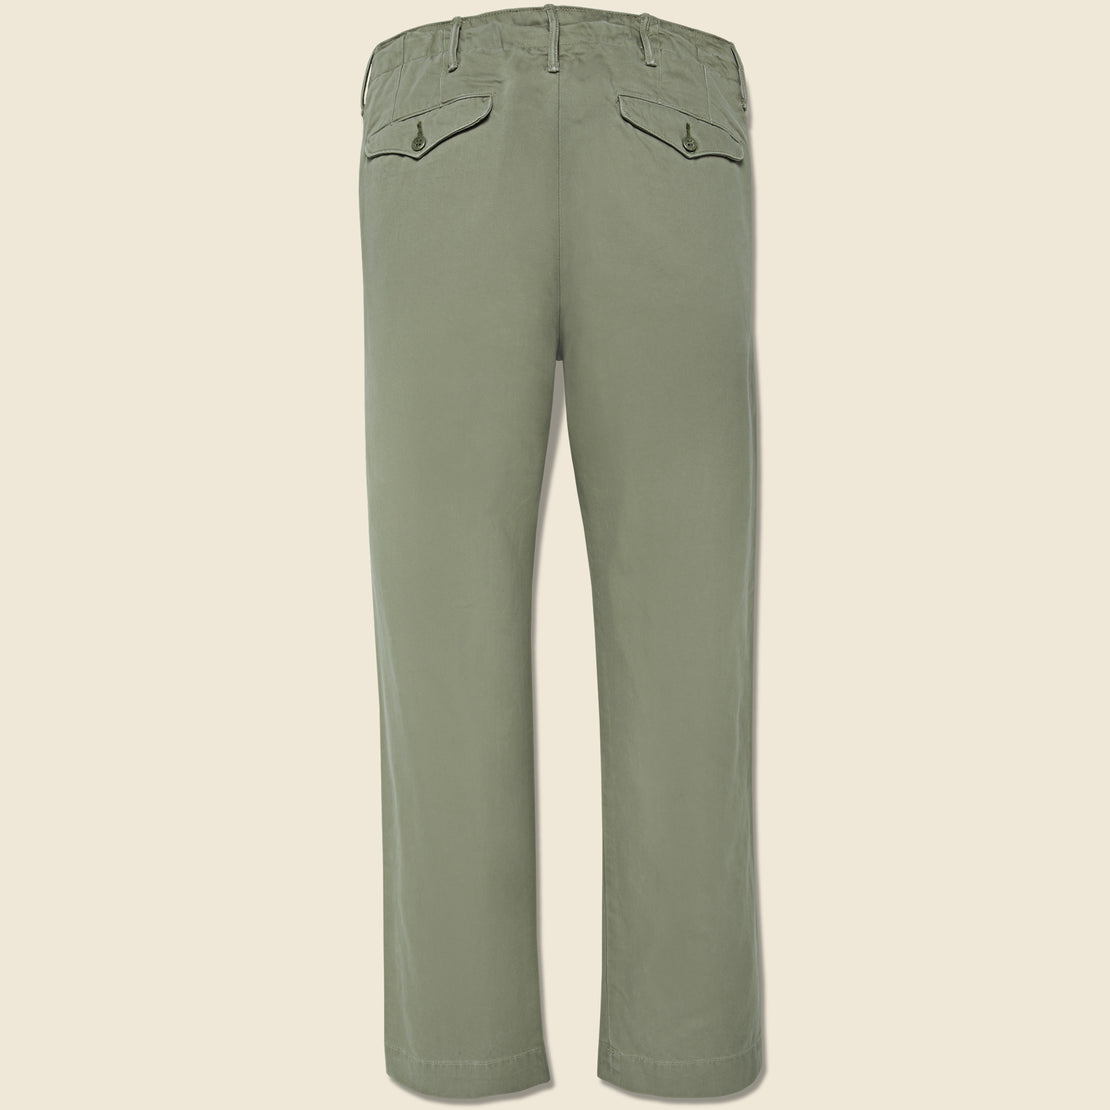 Officer Chino - Olive - RRL - STAG Provisions - Pants - Twill